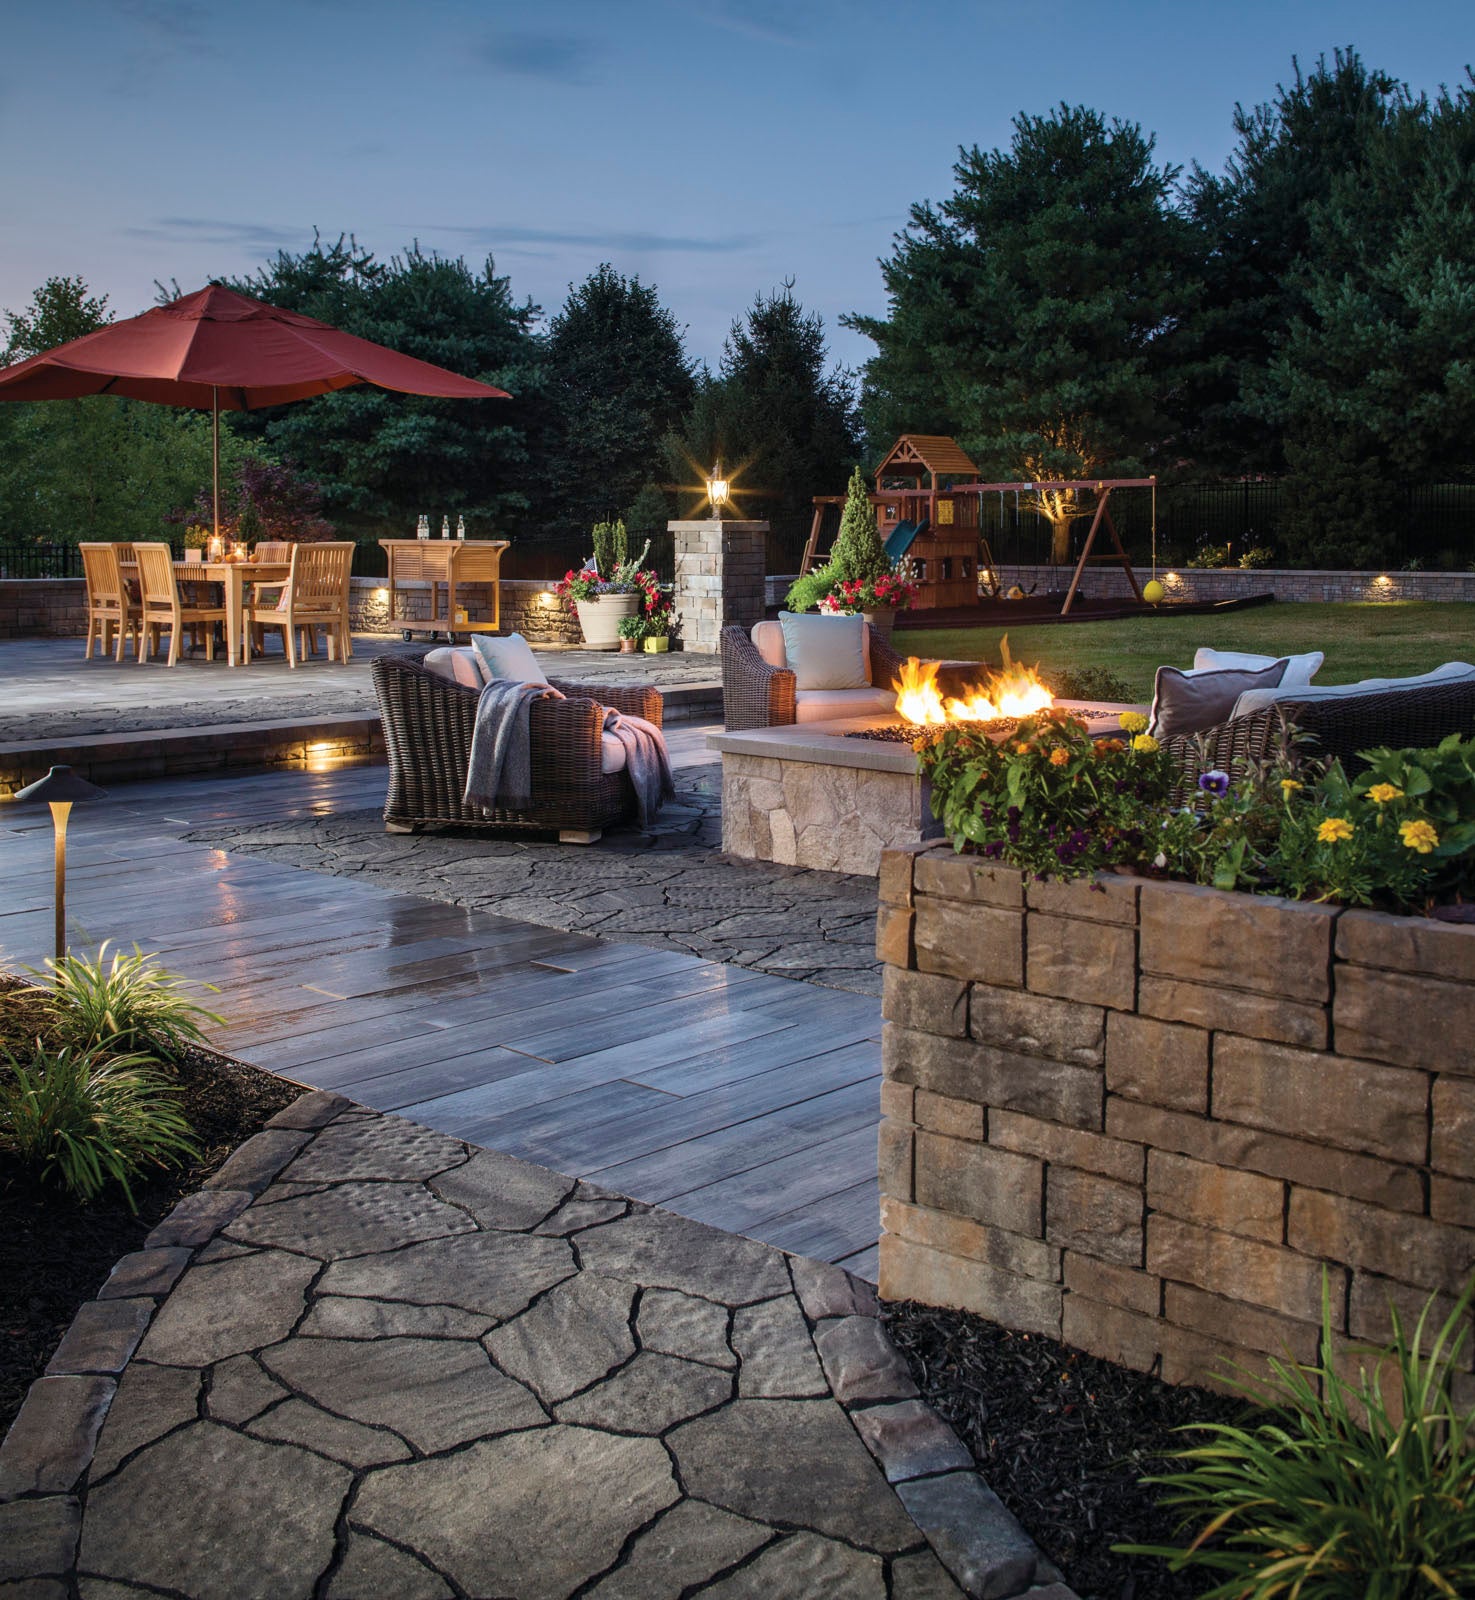 Family-friendly patio design with multiple entertaining zones